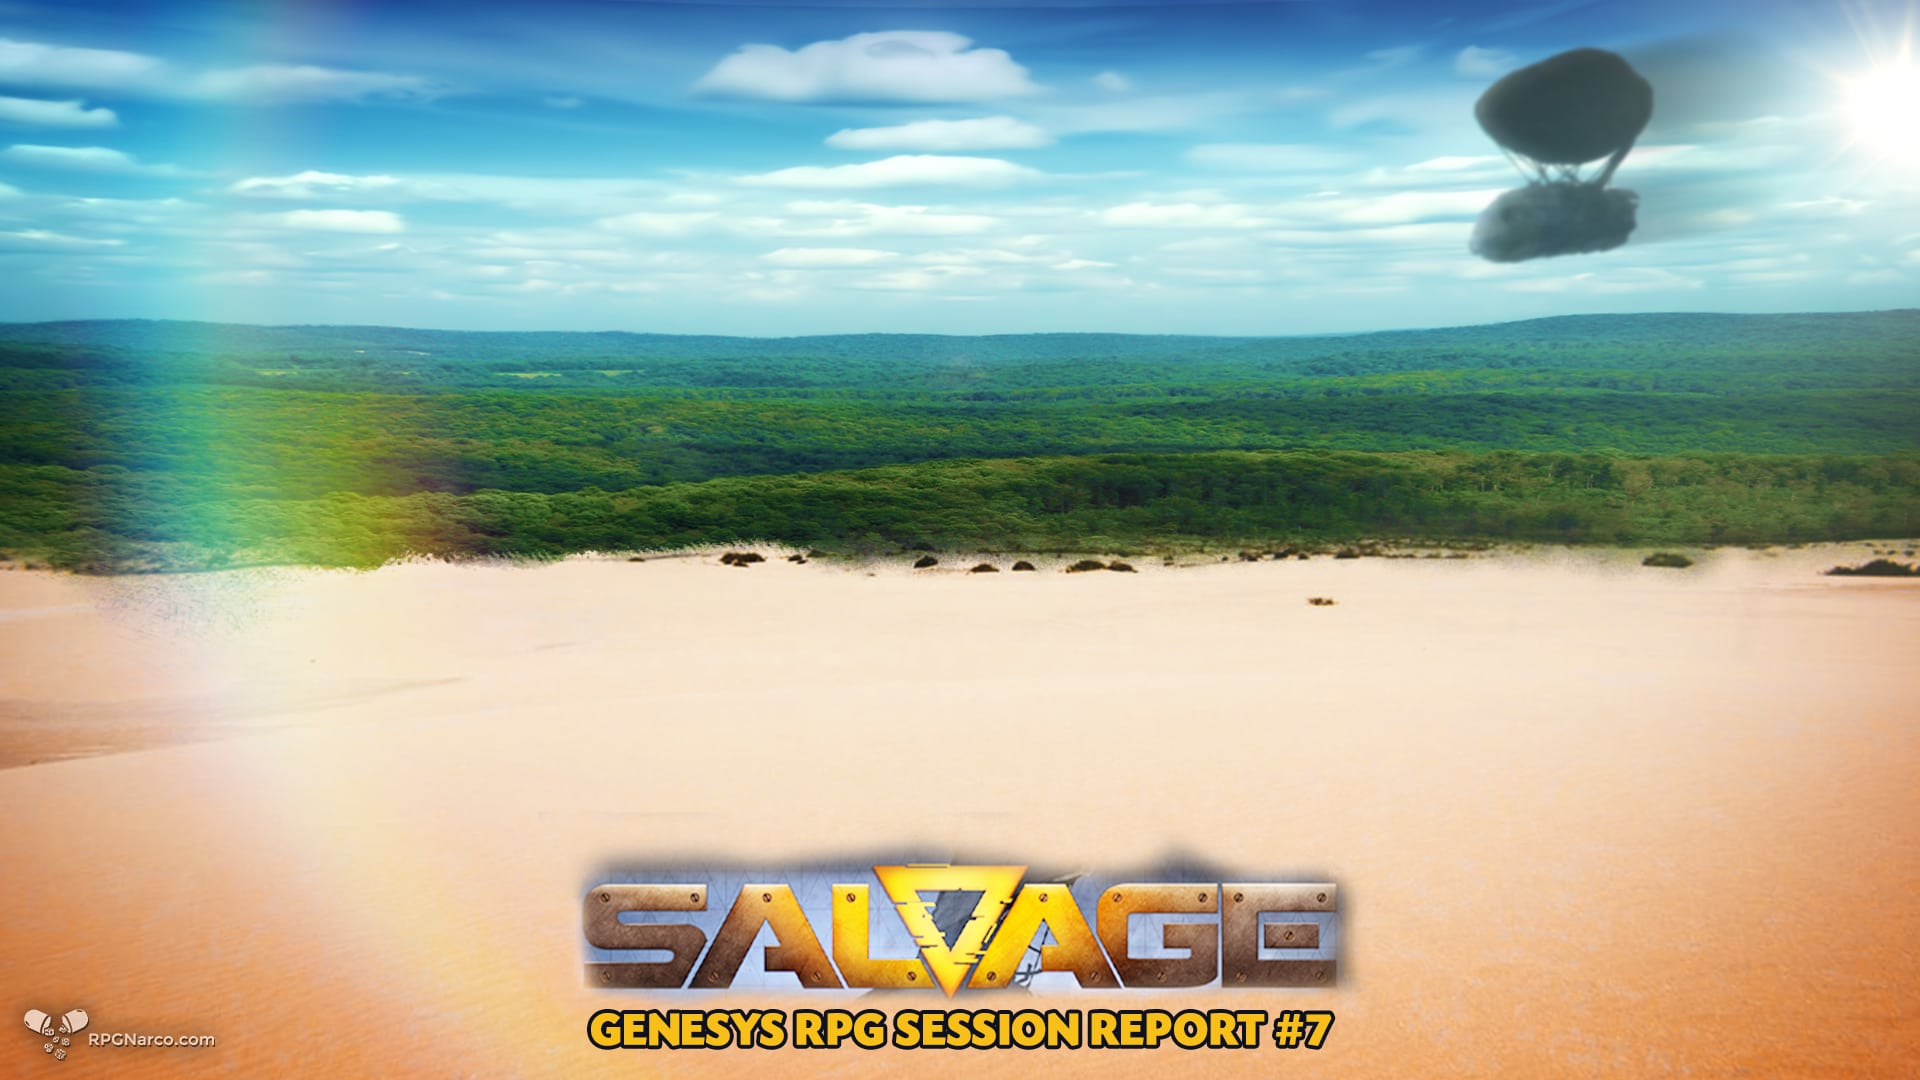 Salvage session 7 cover 04